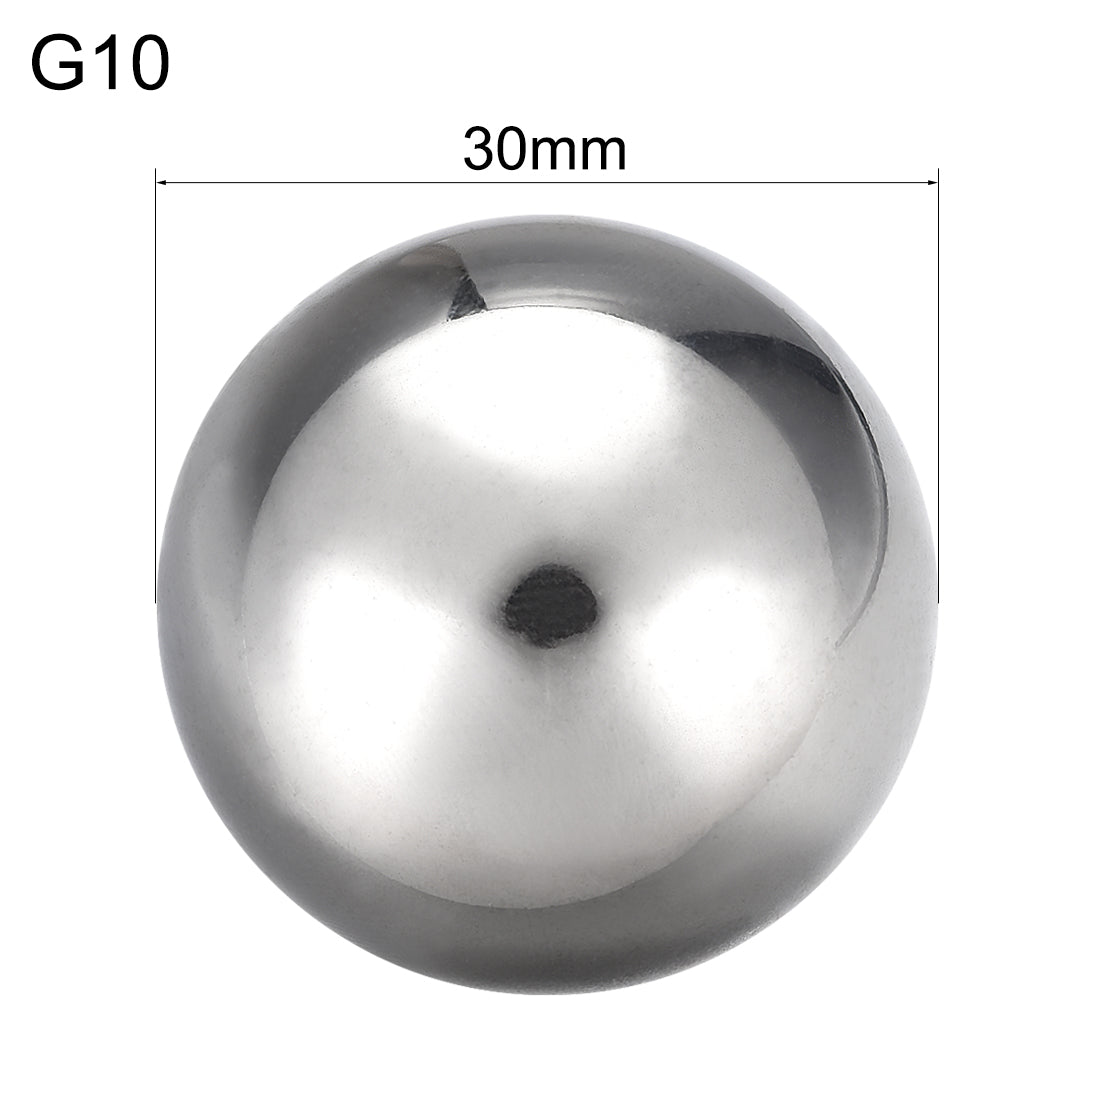 uxcell Uxcell Precision Chrome Steel Bearing Balls 40mm G10